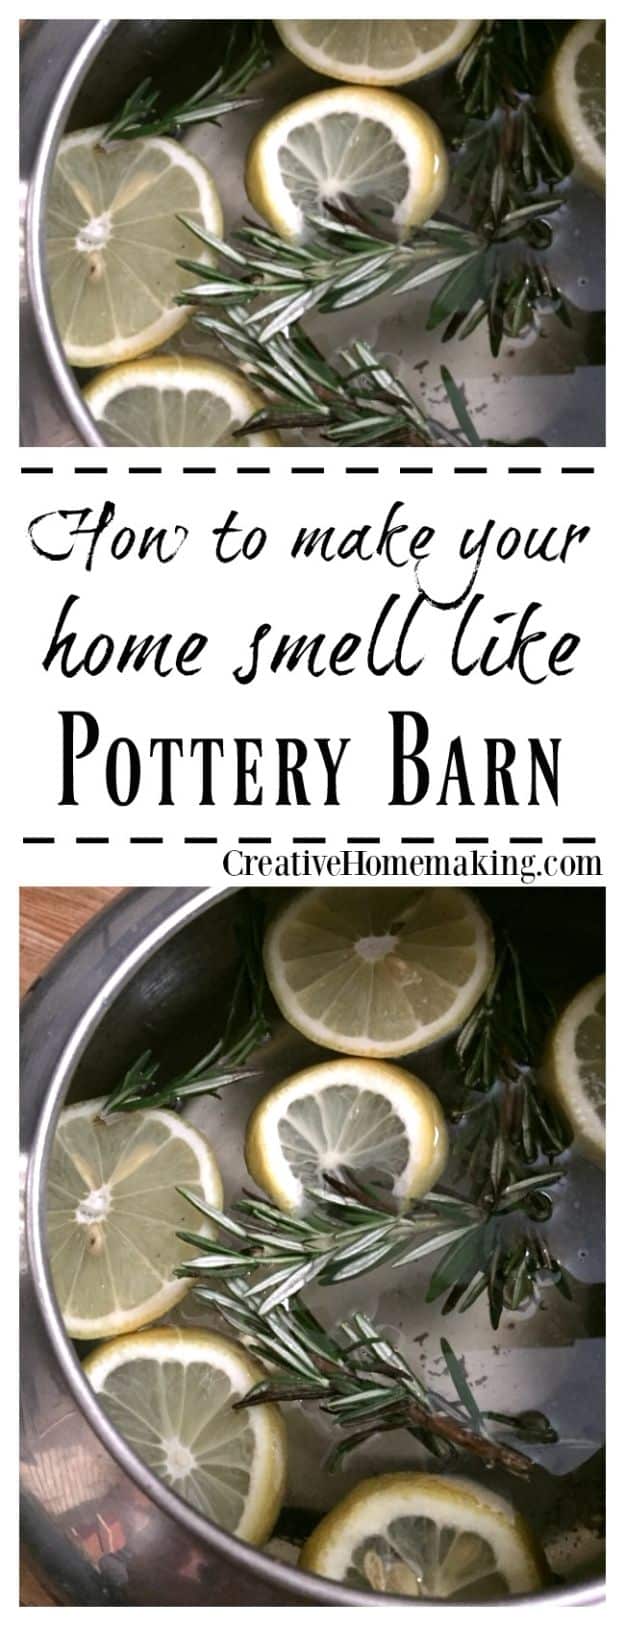 DIY Home Fragrance Ideas - Make Your House Smell Like Pottery Barn - Easy Ways To Make your House and Home Smell Good - Essential Oils, Diffusers, DIY Lampe Berger Oil, Candles, Room Scents and Homemade Recipes for Odor Removal - Relaxing Lavender, Fresh Clean Smells, Lemon, Herb 